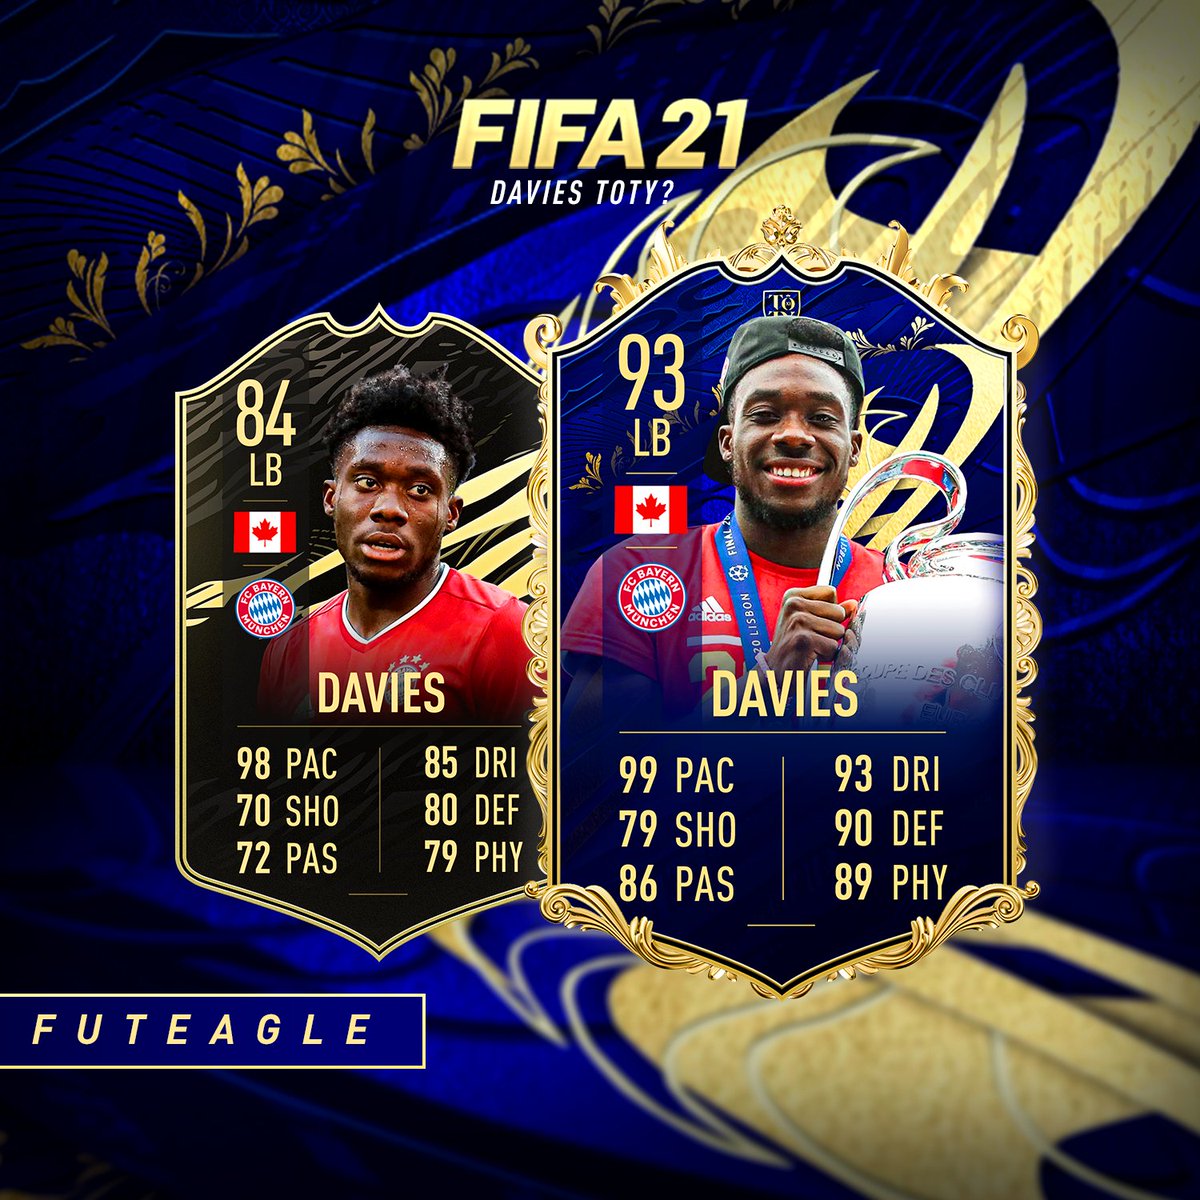 Eagle On Twitter Davies Team Of The Year Do You Think Alphonso Davies Deserves To Get A Toty Card In Fifa21 Toty Card Design Is Made By The Legendary Fcwolke99